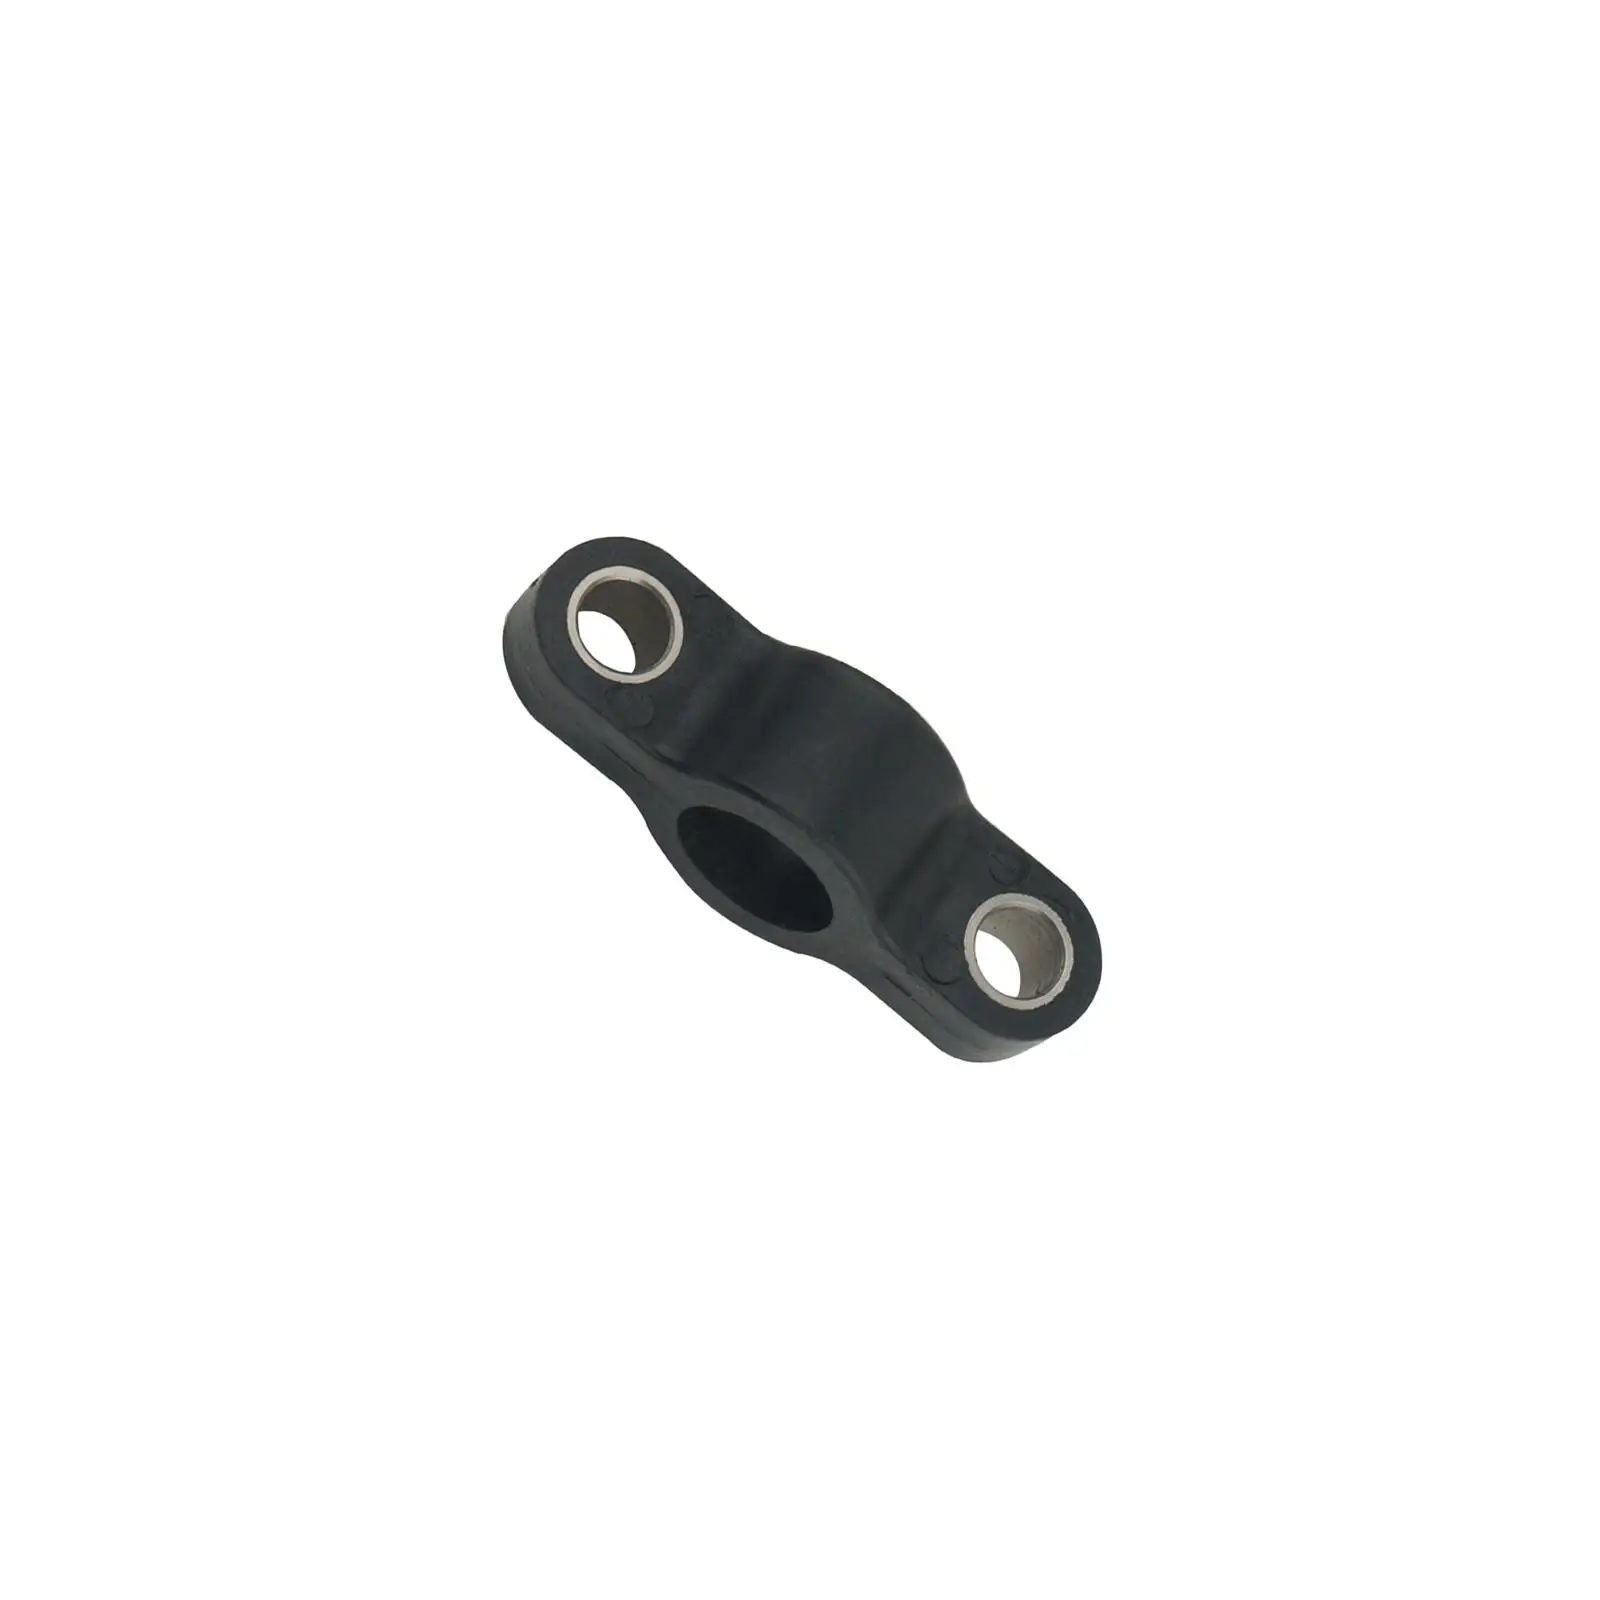 Nylon Bracket 6F5-41662 for Yamaha Outboard Motor Replacement Black Vehicle Repair Parts Convenient Installation